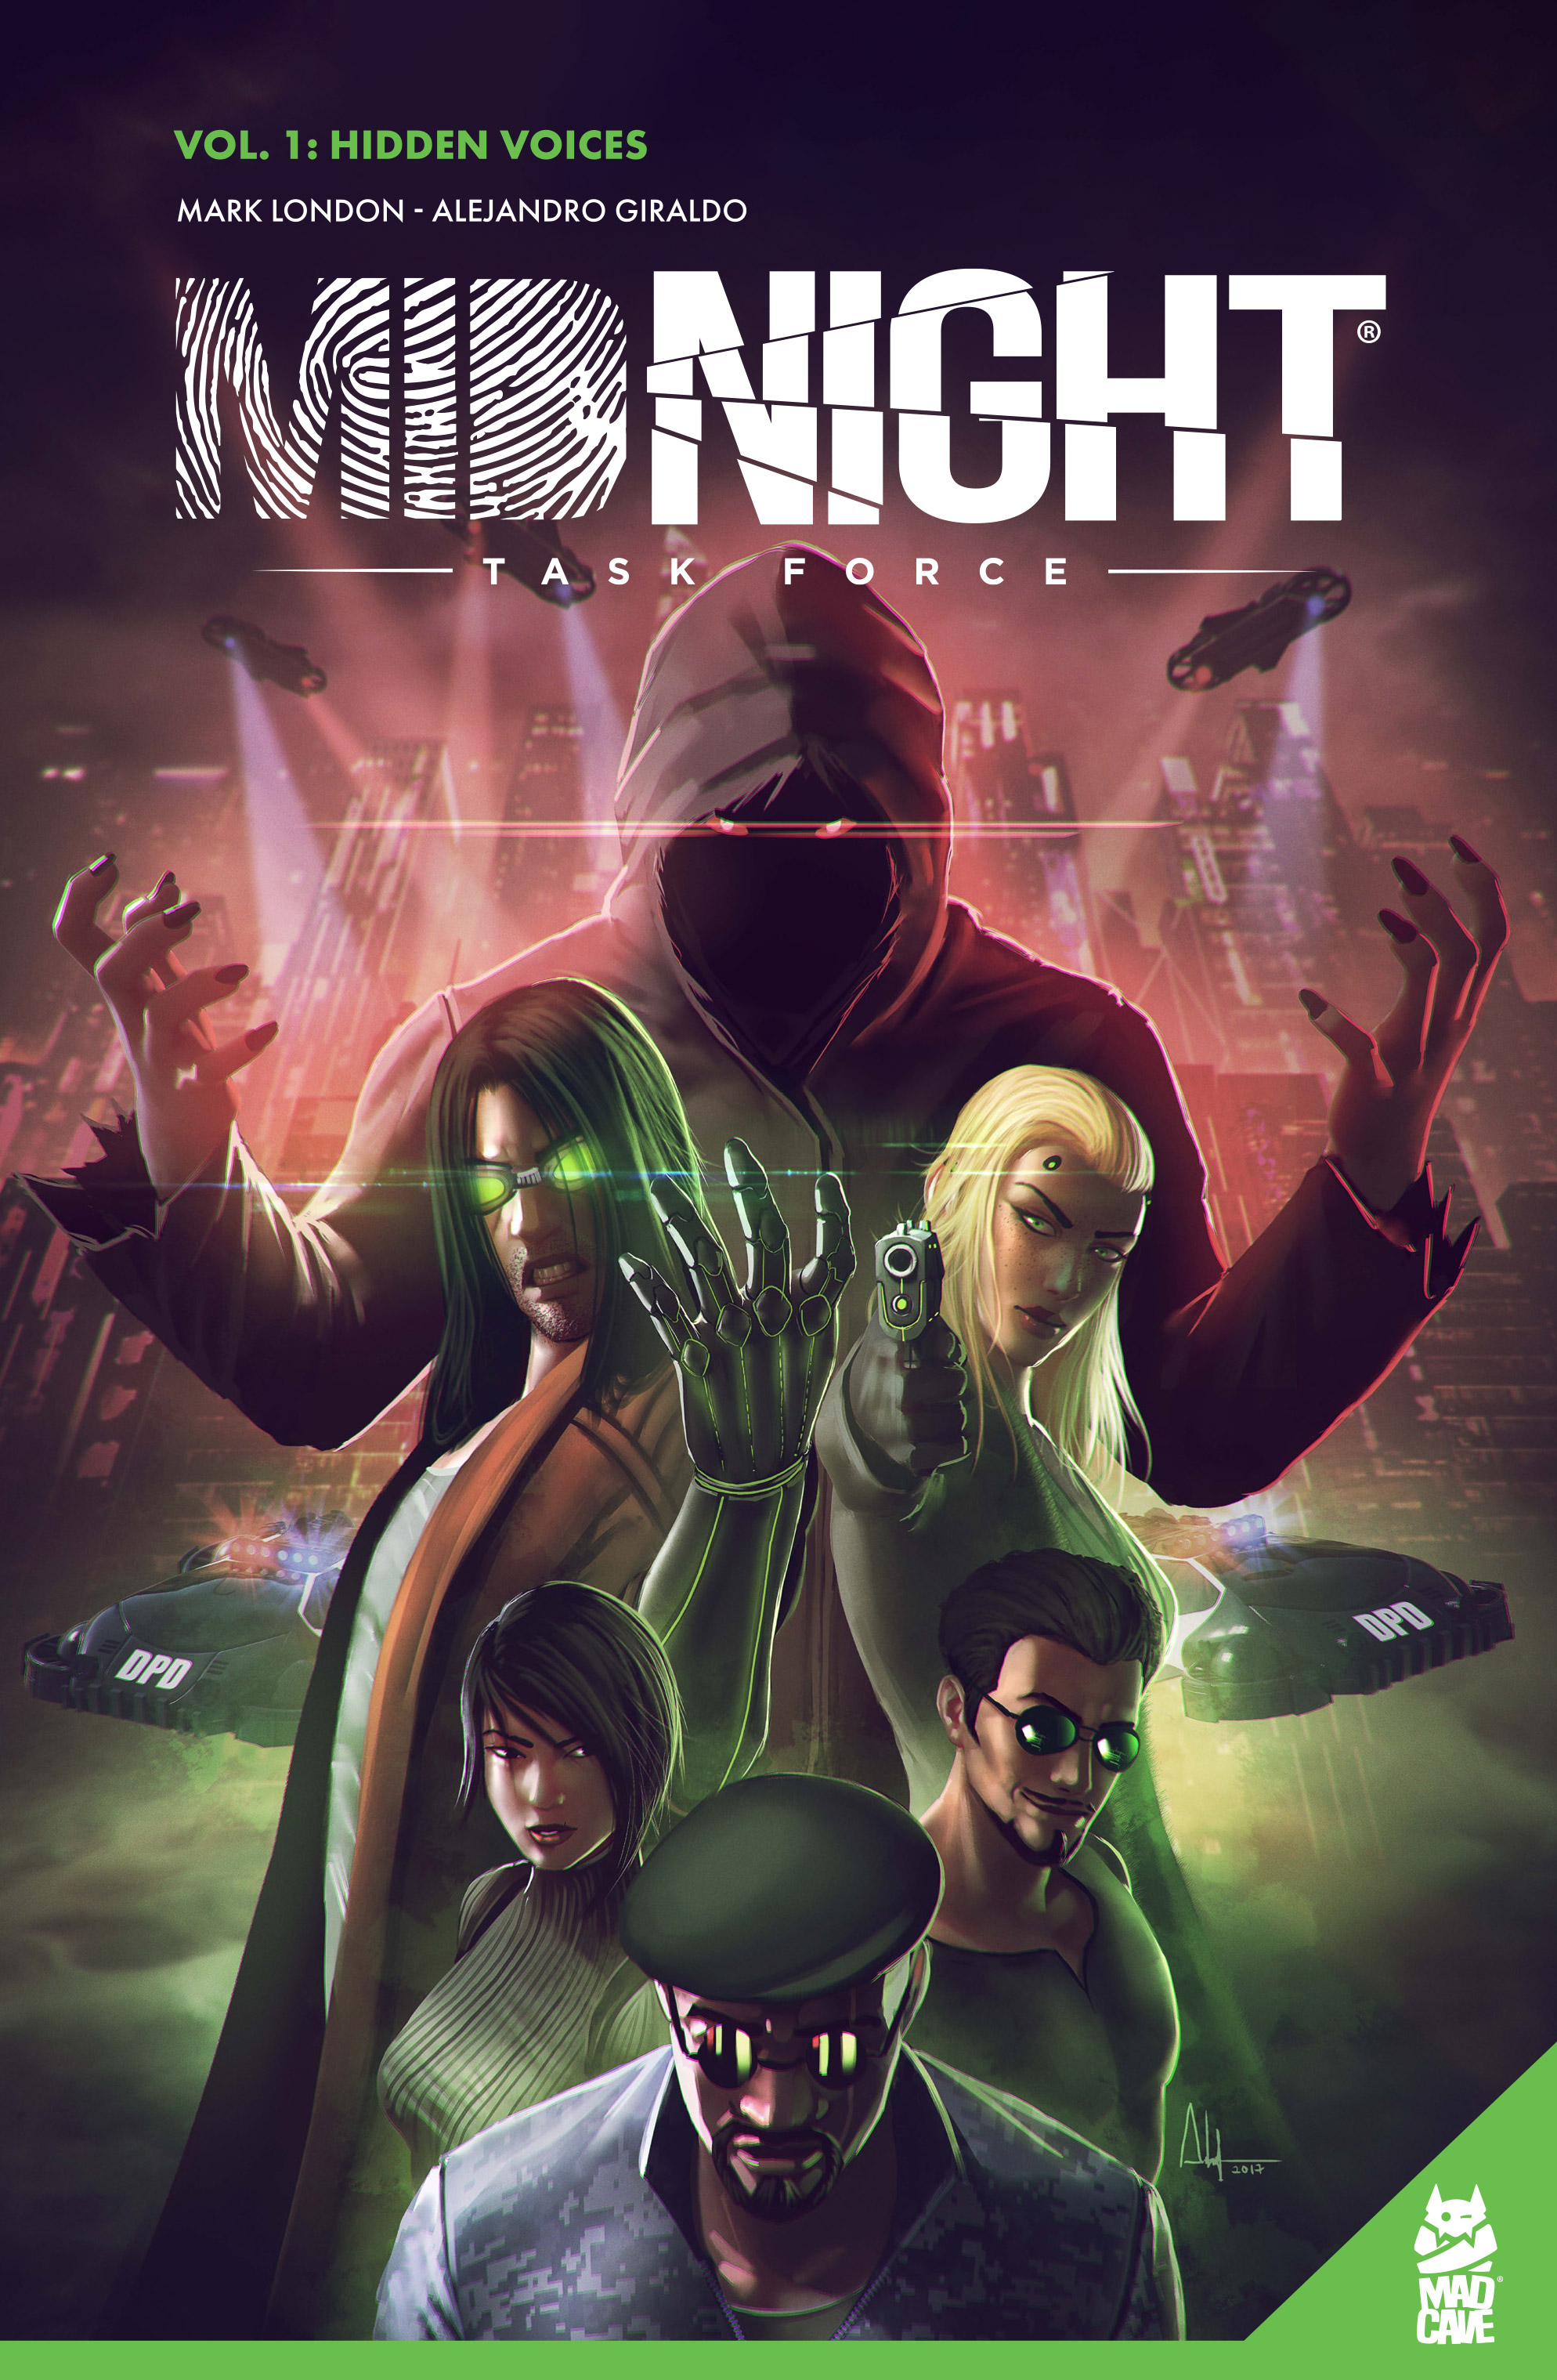 Read online Midnight Task Force comic -  Issue # TPB - 1